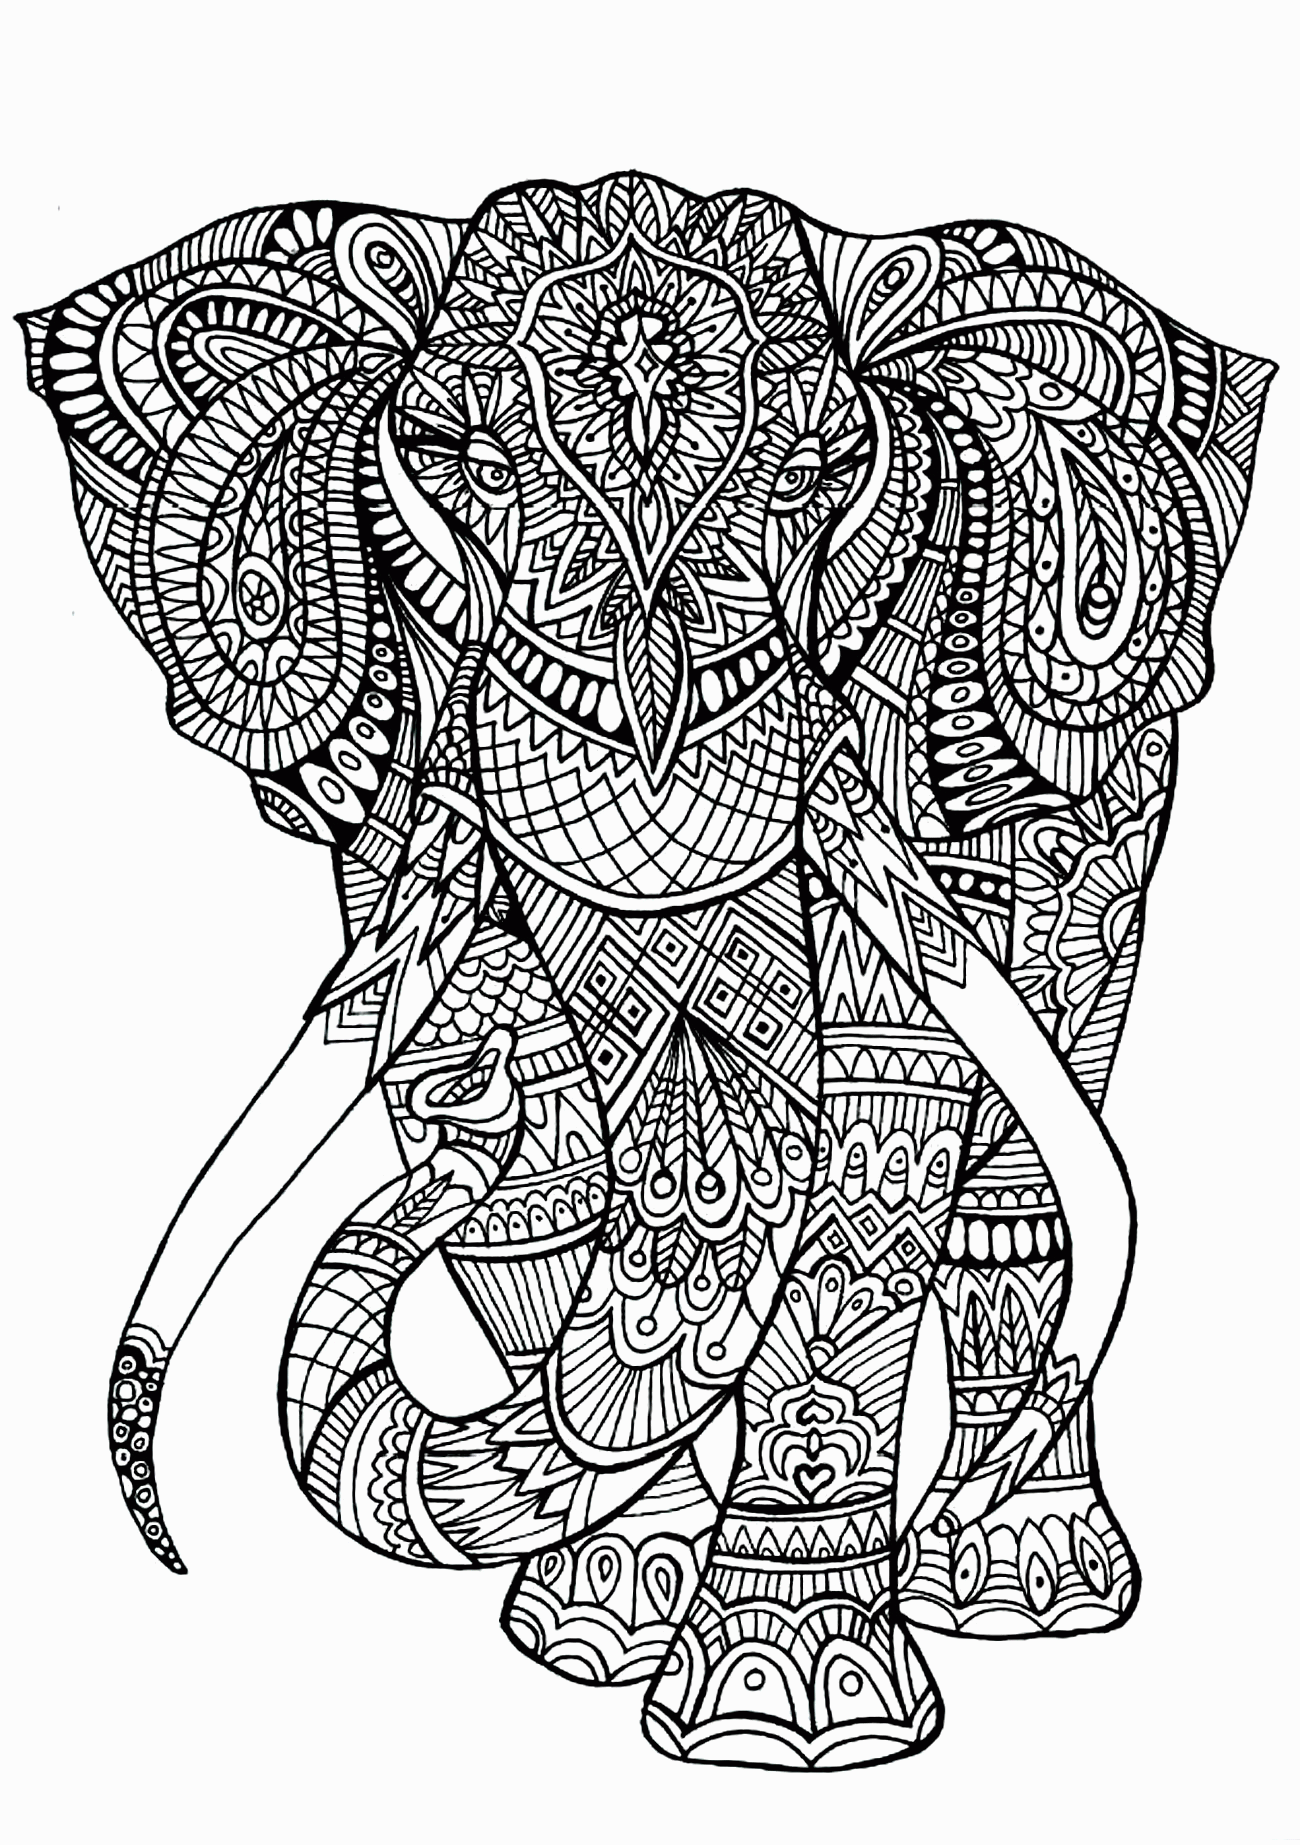 Animal   Coloring Pages For Adults   Page 20   Coloring Home